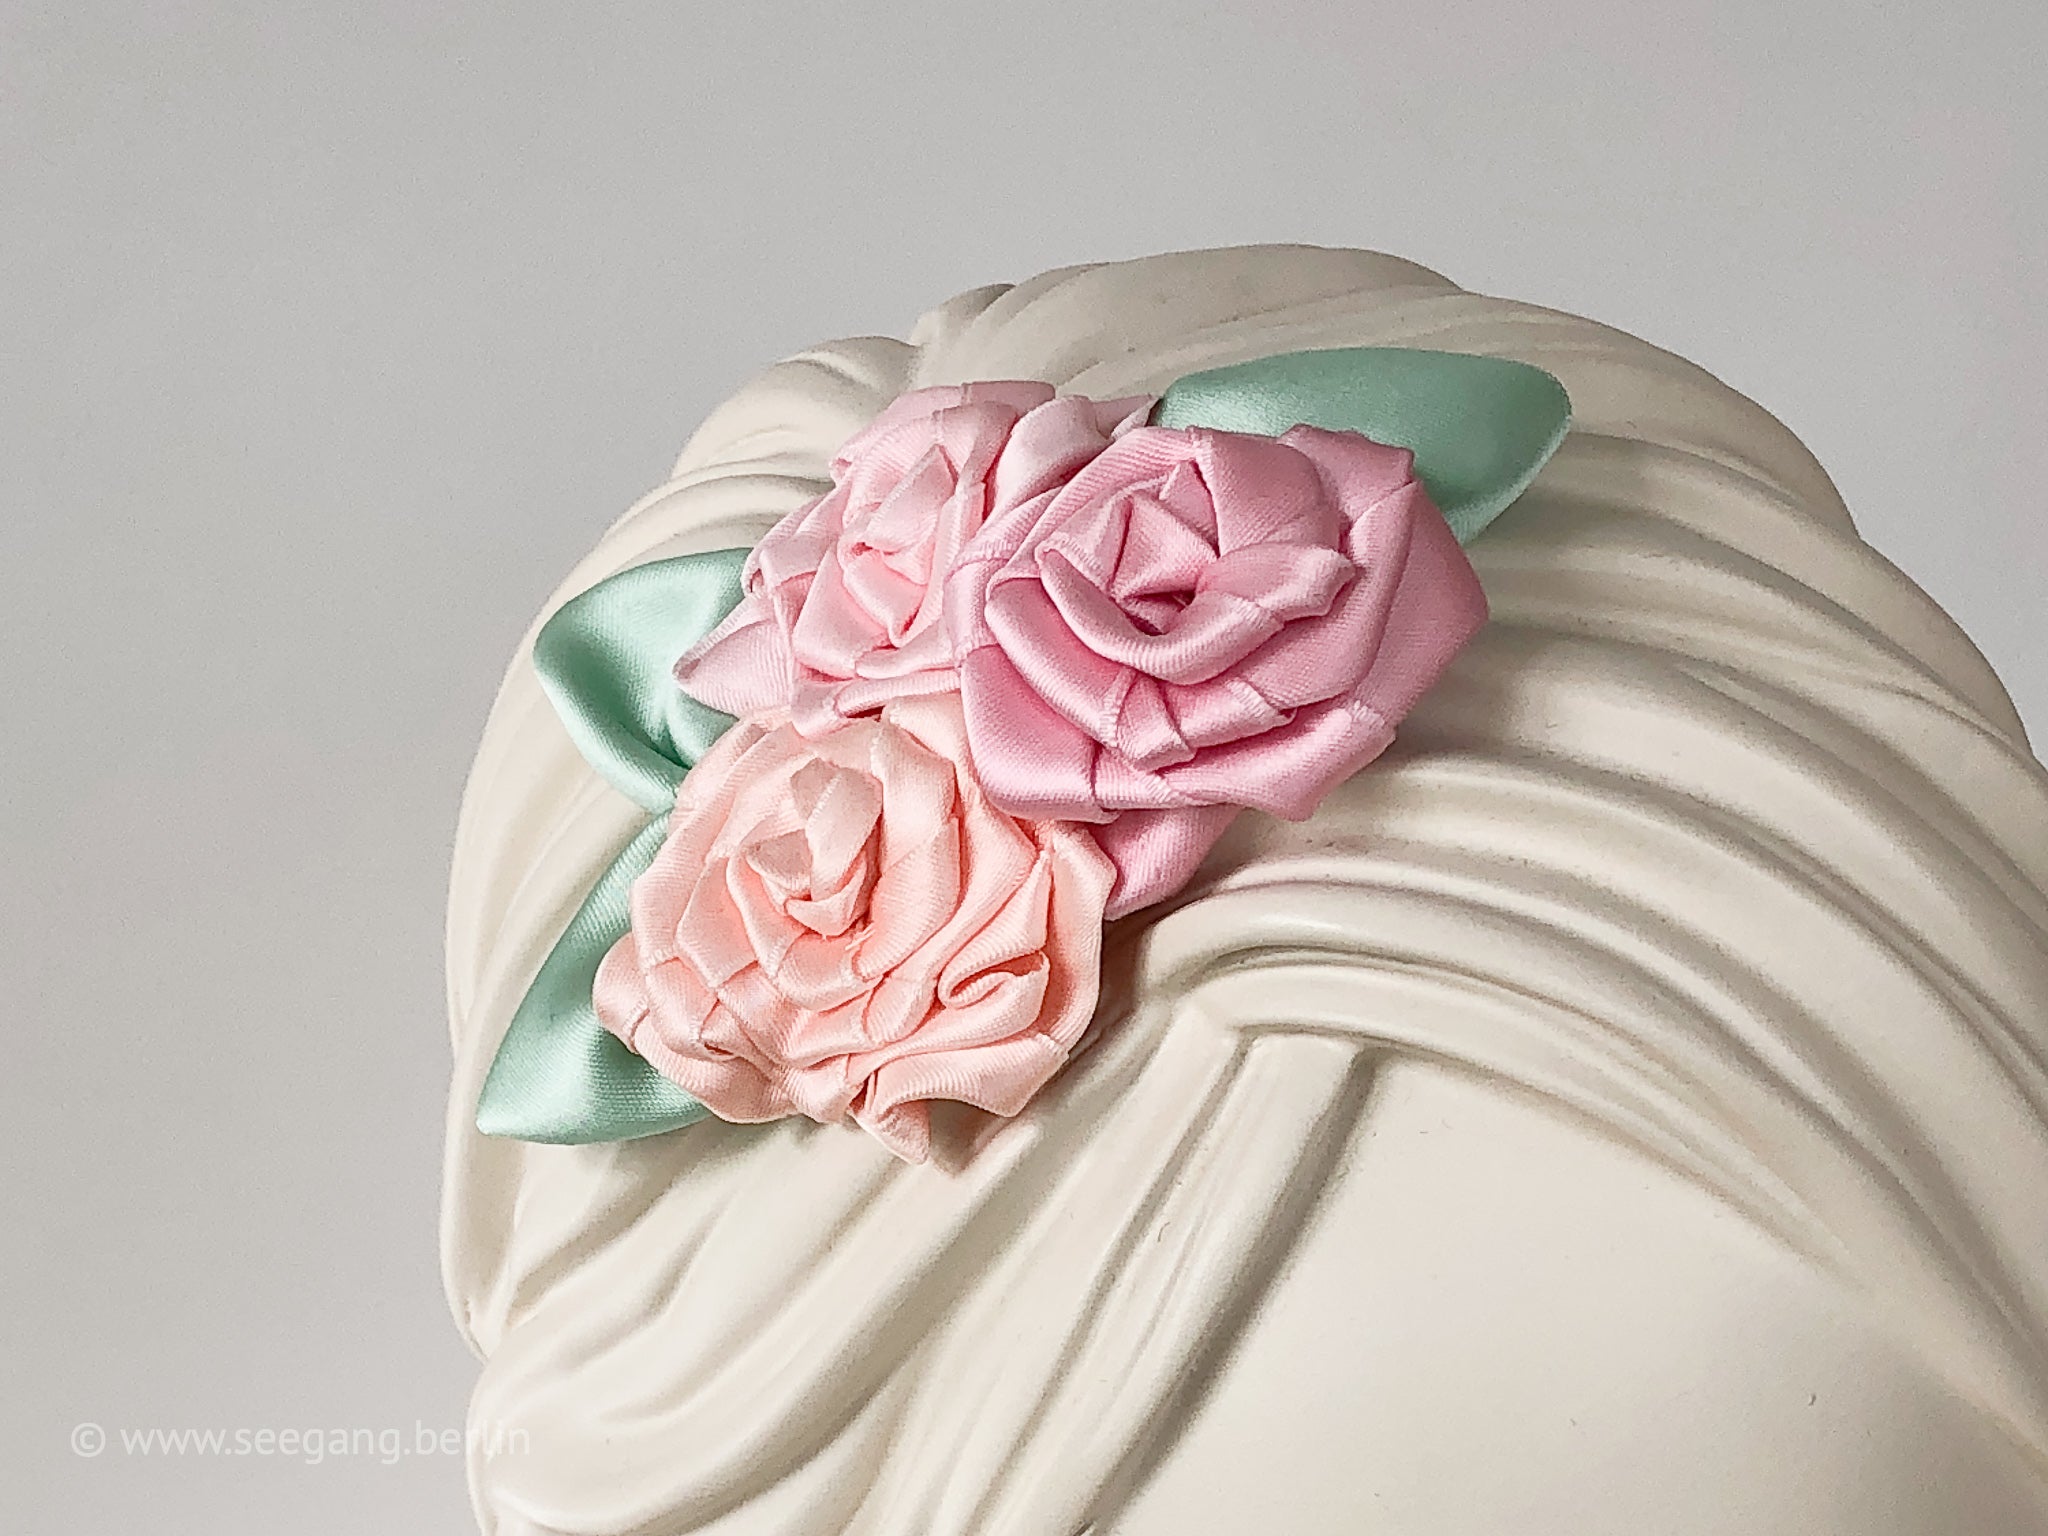 Fascinator, Hair flowers with roses in sorbet colors and mint colored leaves. Fresh!